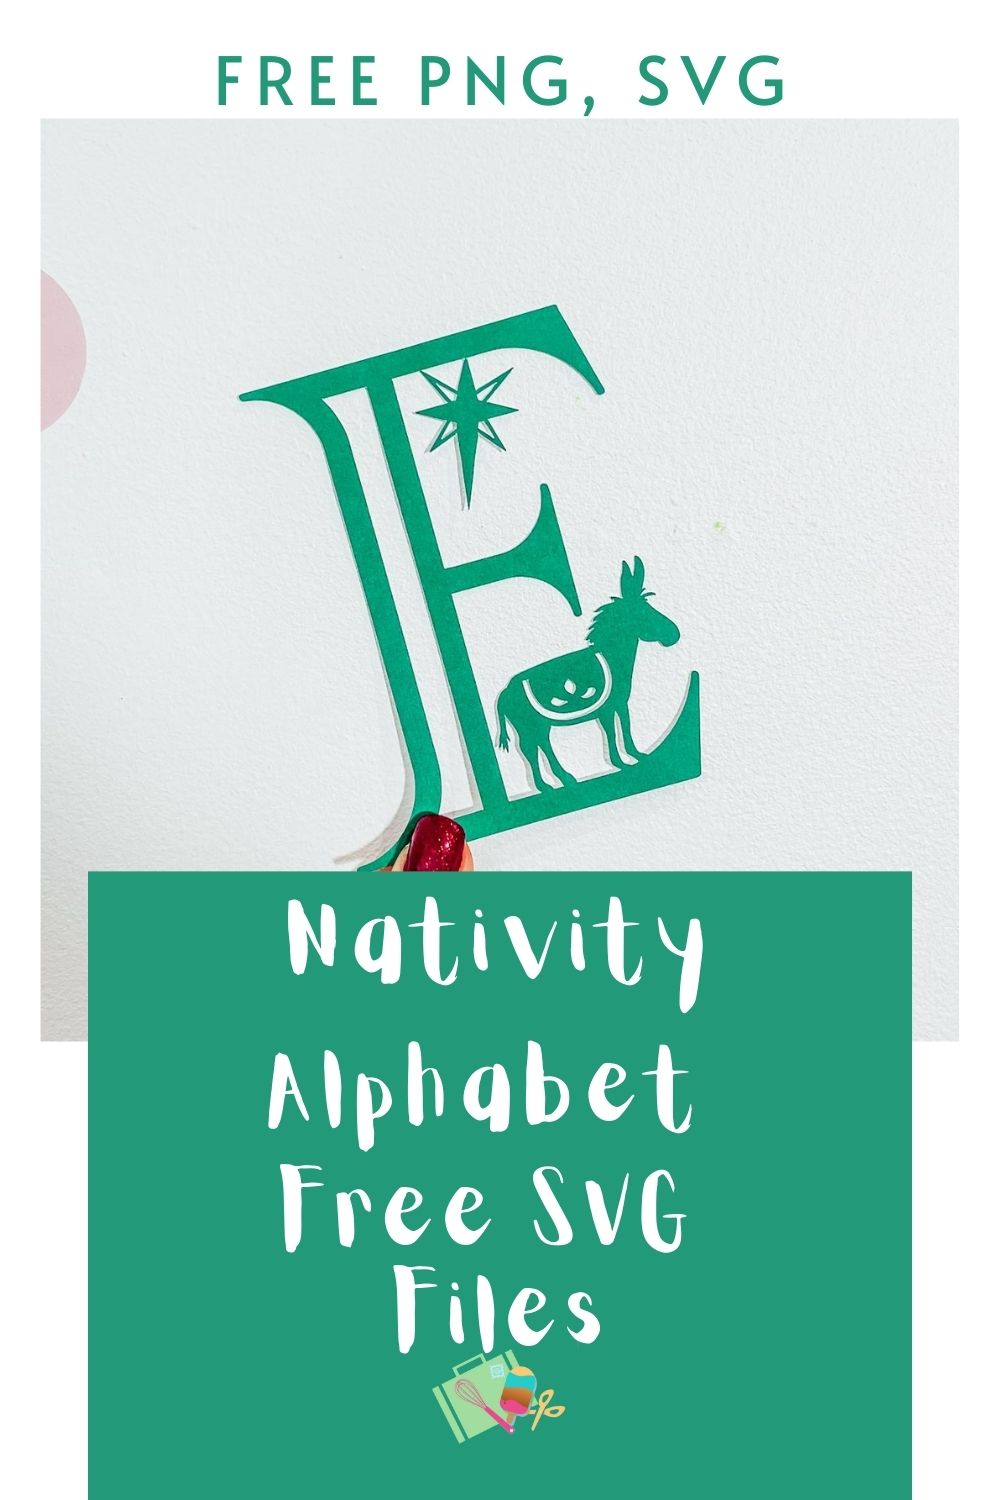 Nativity Alphabet Free SVG, PNG files for Christmas Crafting with Cricut or Silhouette